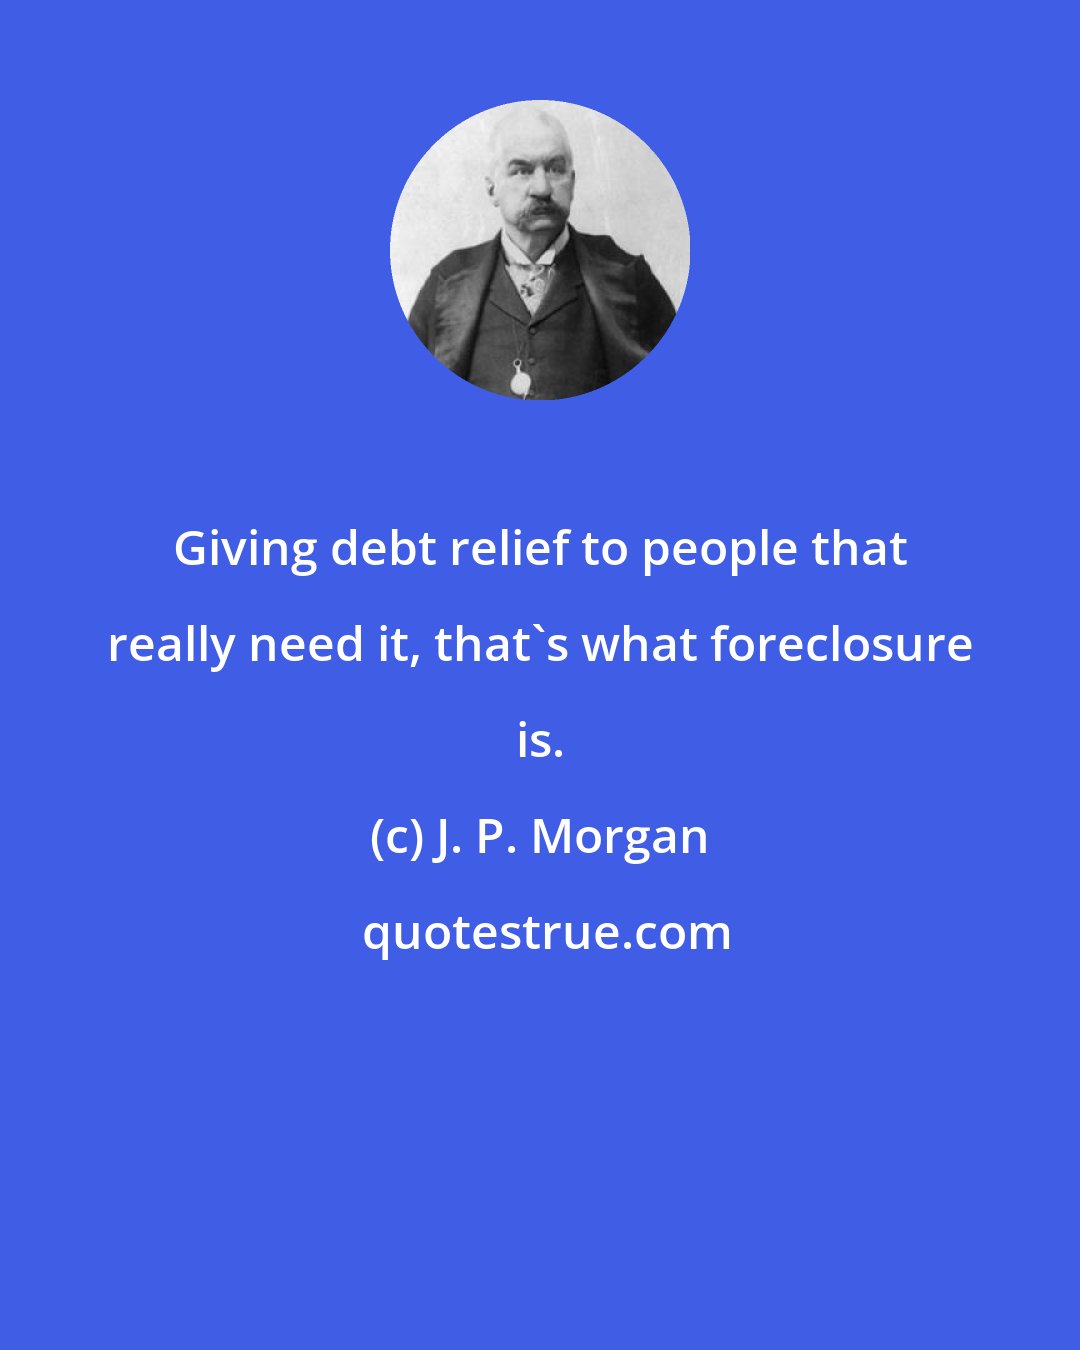 J. P. Morgan: Giving debt relief to people that really need it, that's what foreclosure is.